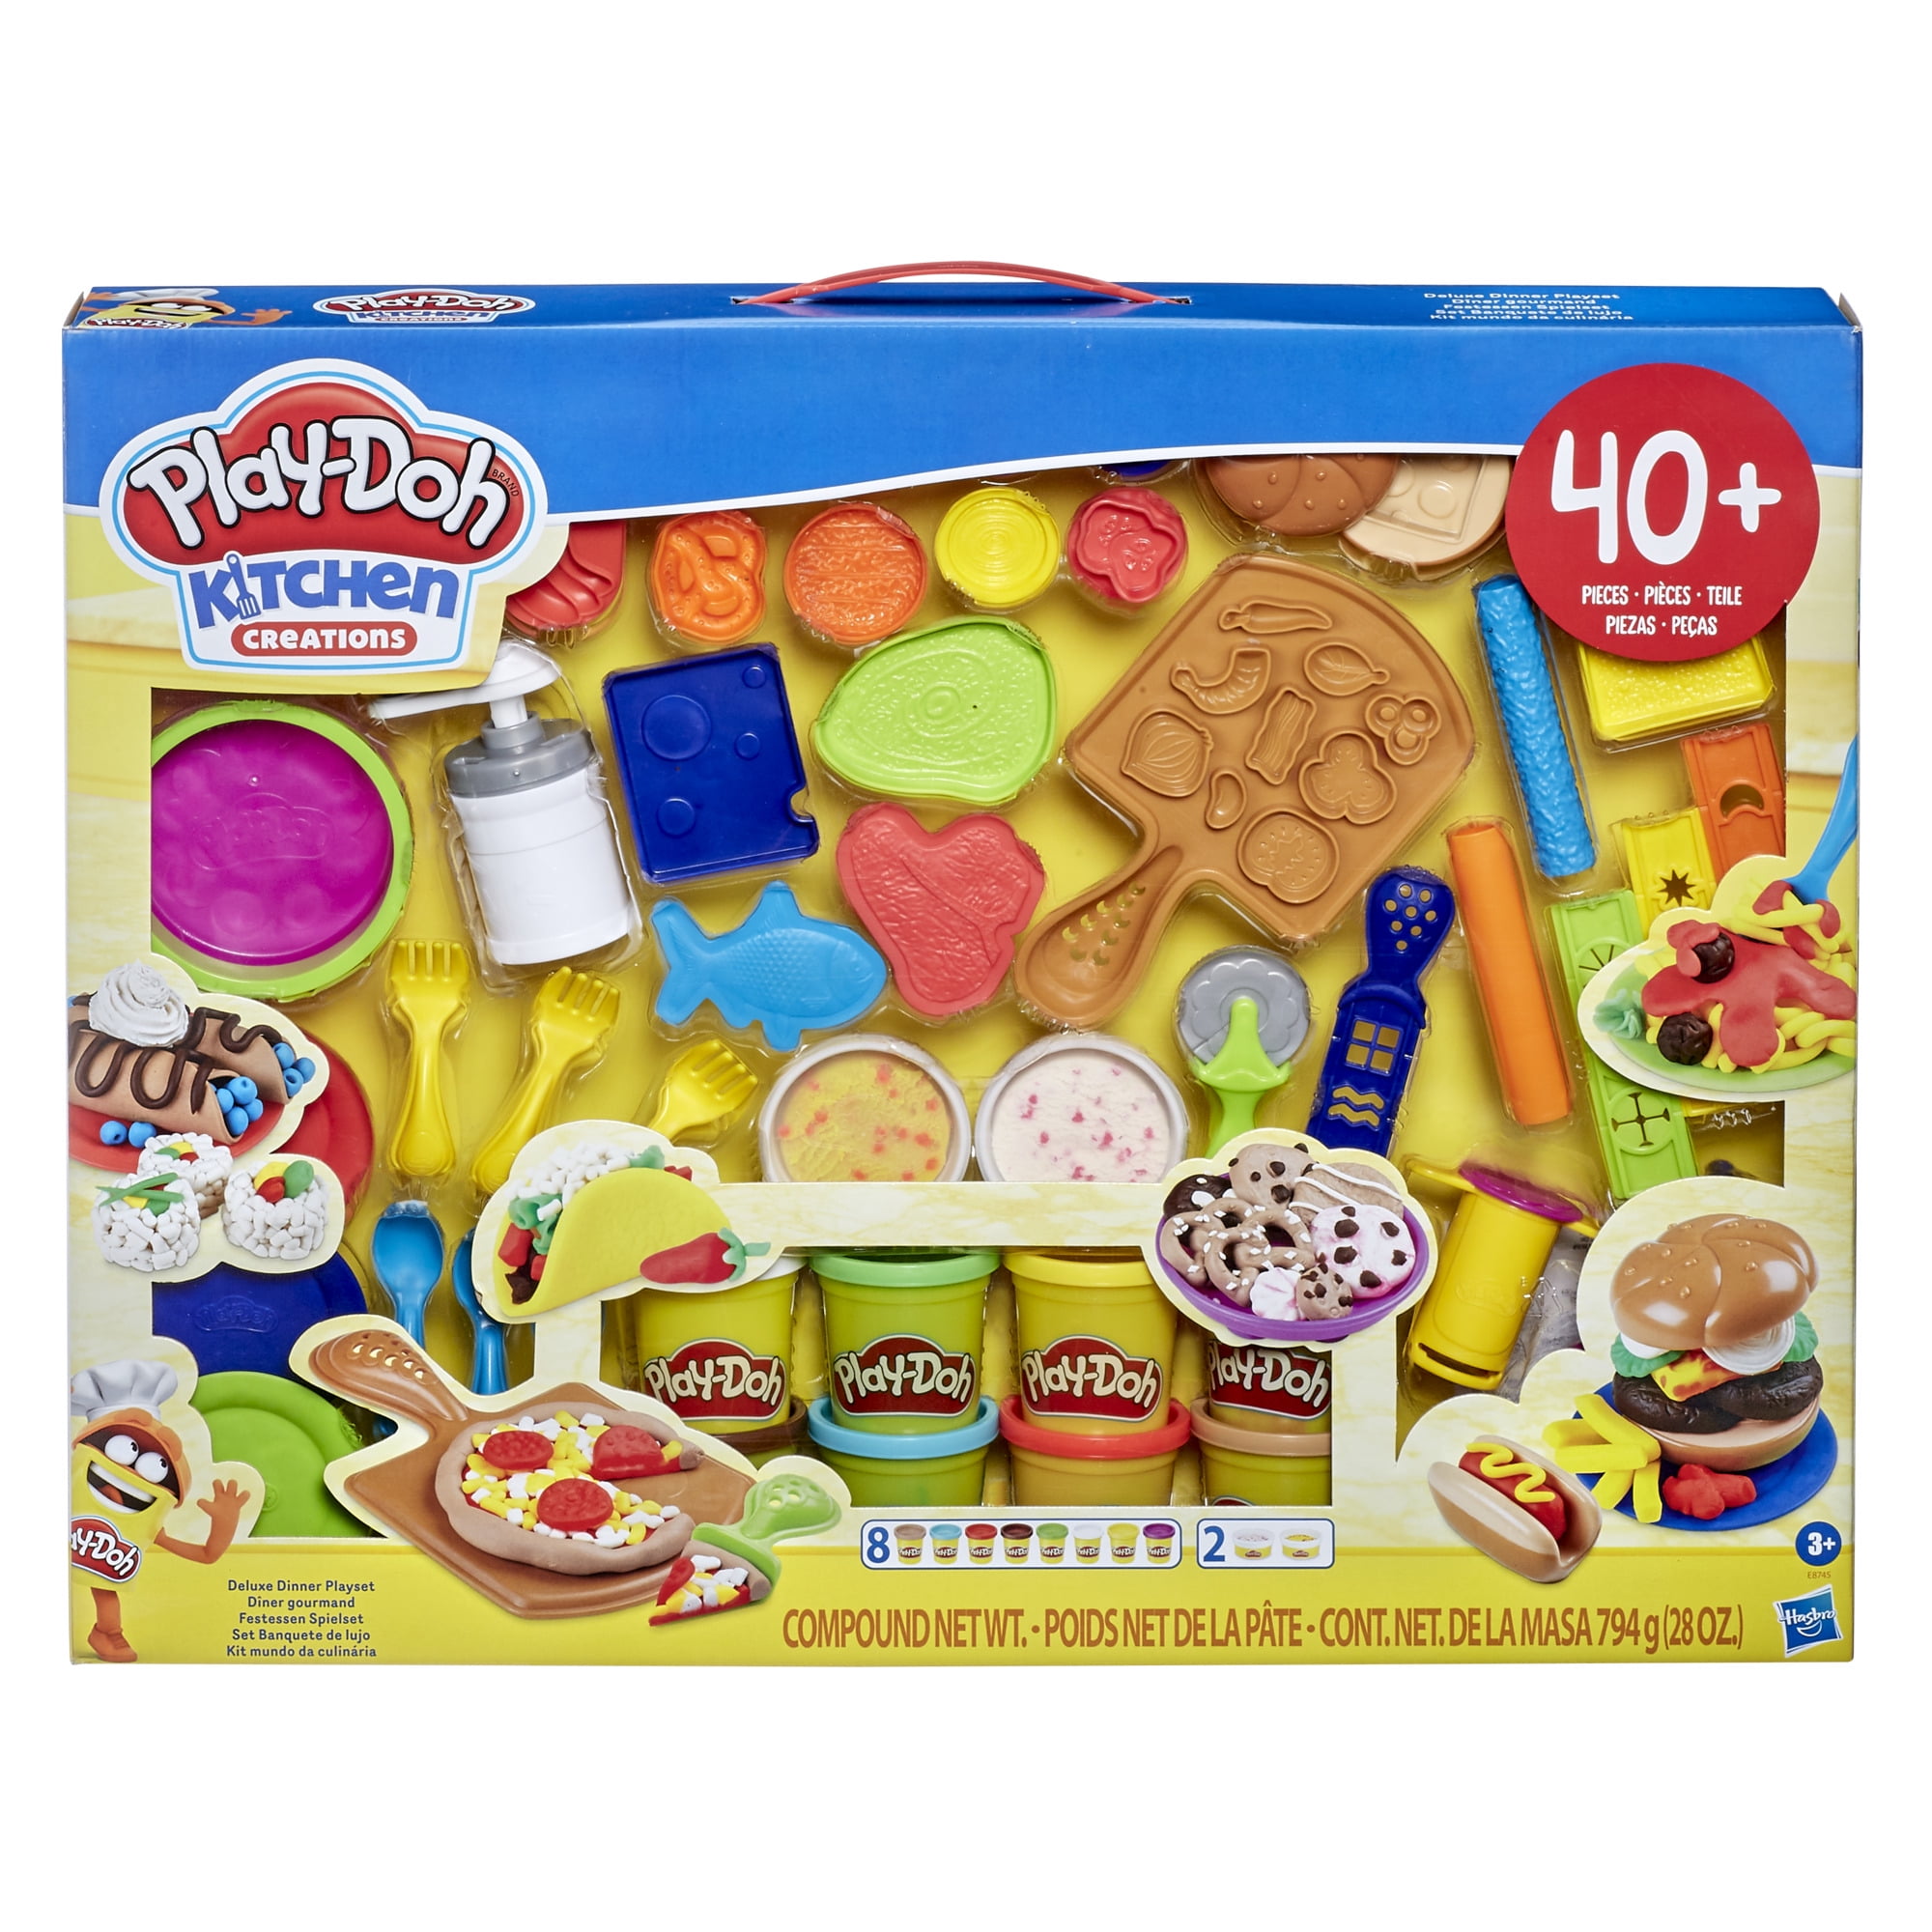 PLAY TOY SET LITTLE KITCHEN 14 PIECES BAKING SET A TO-Z USED WITH DOUGH G